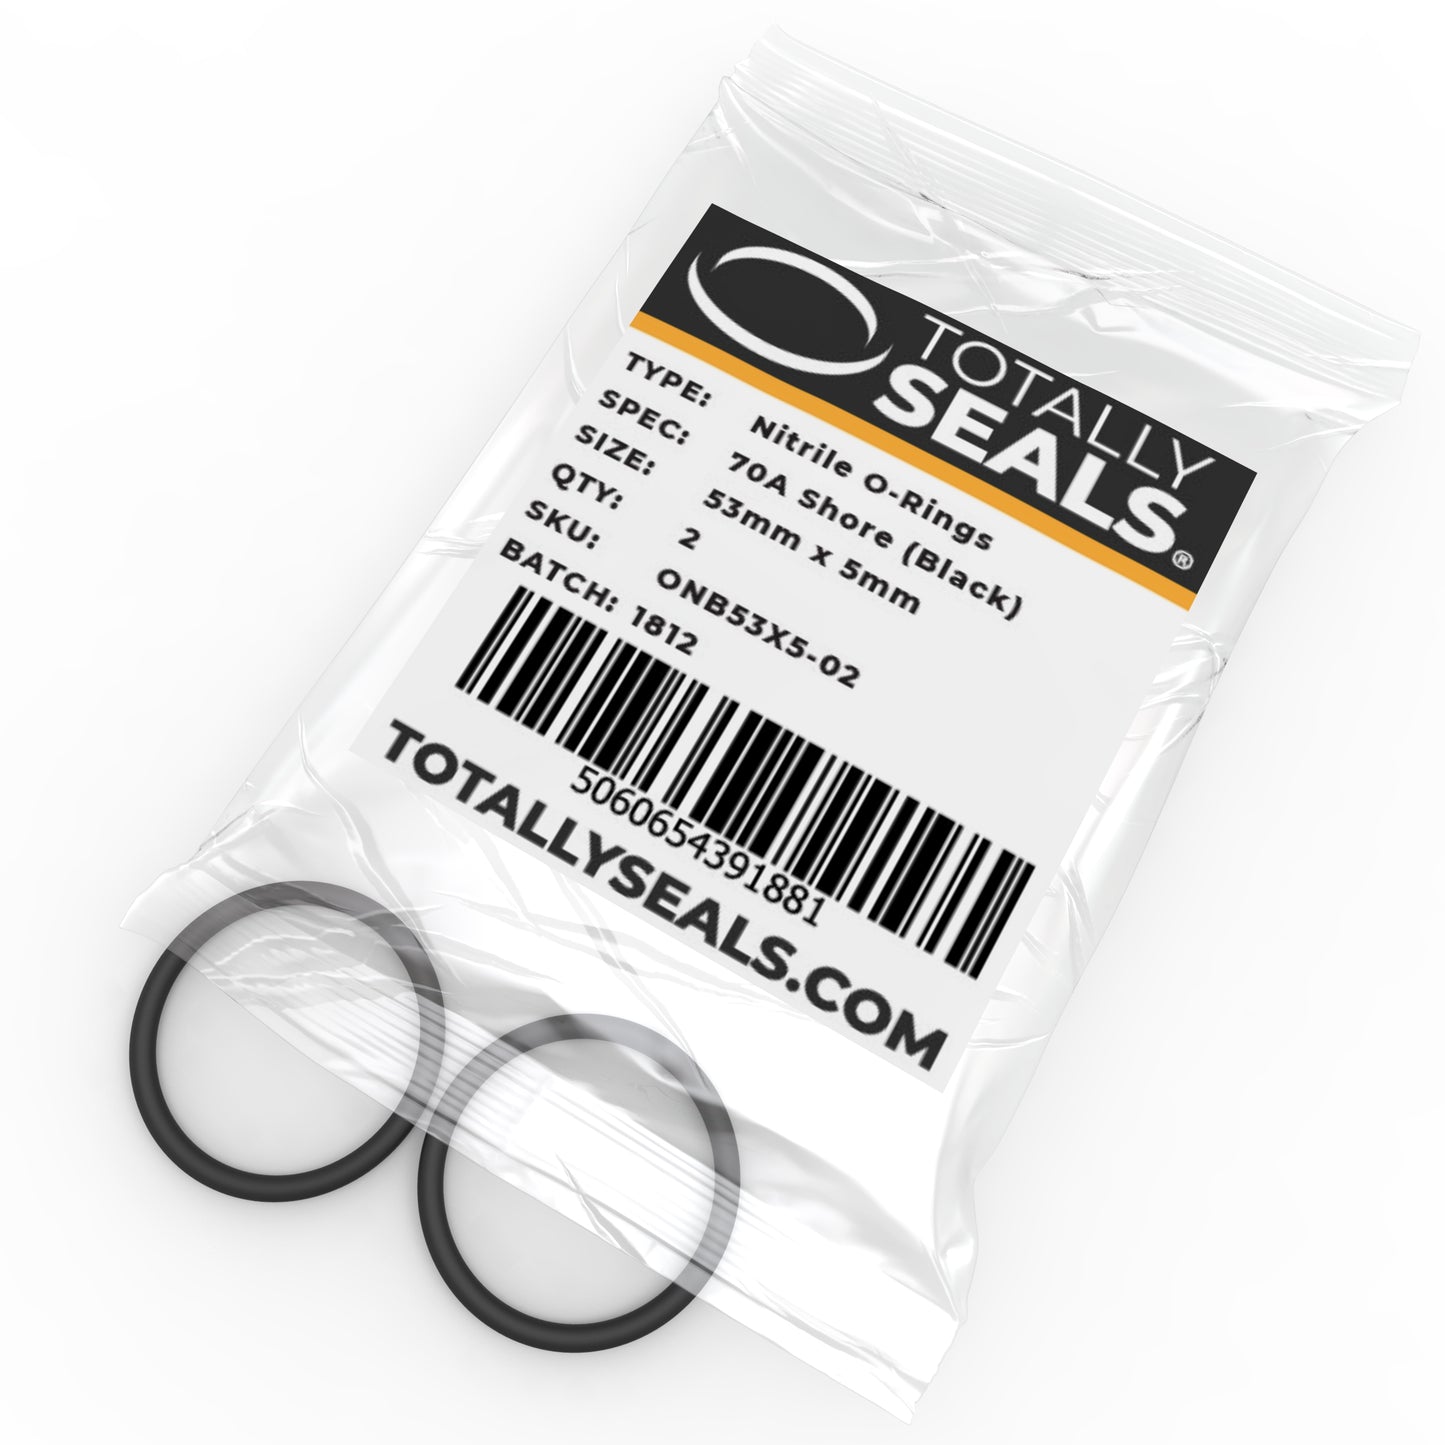 53mm x 5mm (63mm OD) Nitrile O-Rings - Totally Seals®